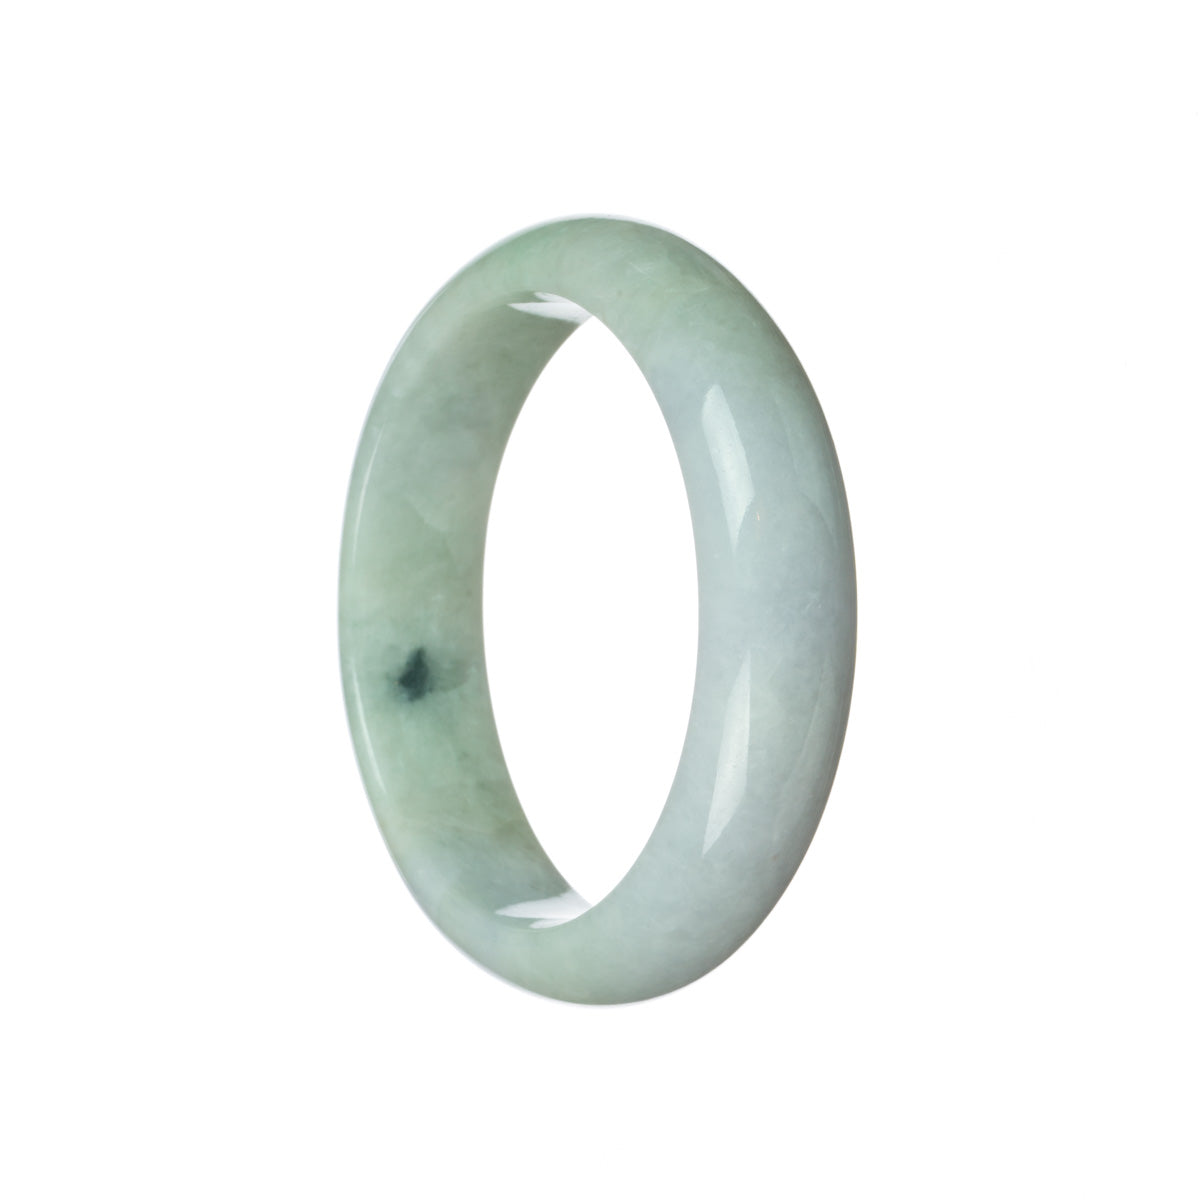 A beautiful pale green and lavender jade bangle bracelet with a half moon shape, measuring 59mm.